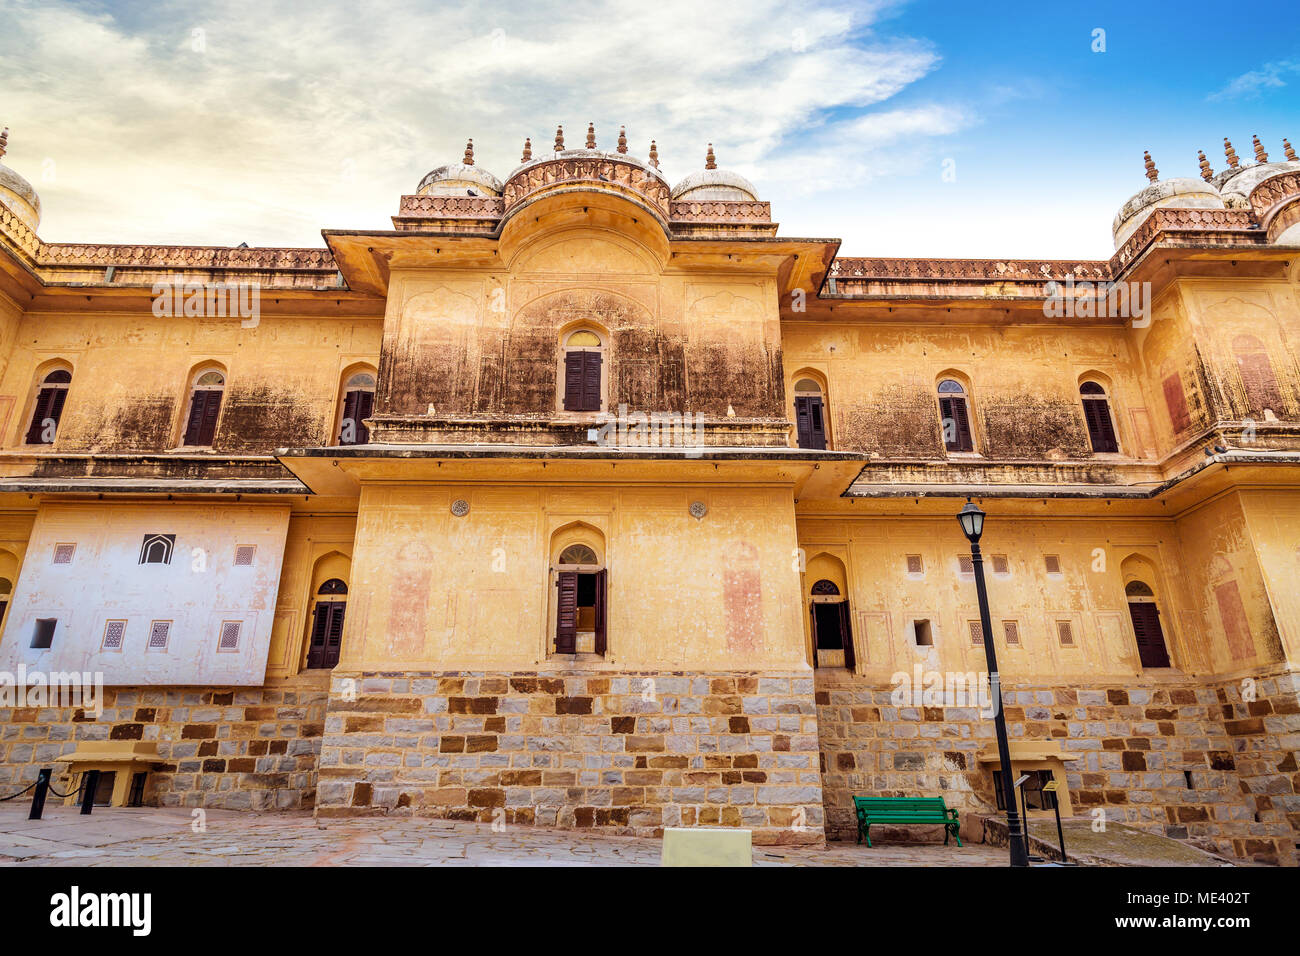 Historic Nahargarh Fort at Jaipur Rajasthan exterior architecture view. Stock Photo